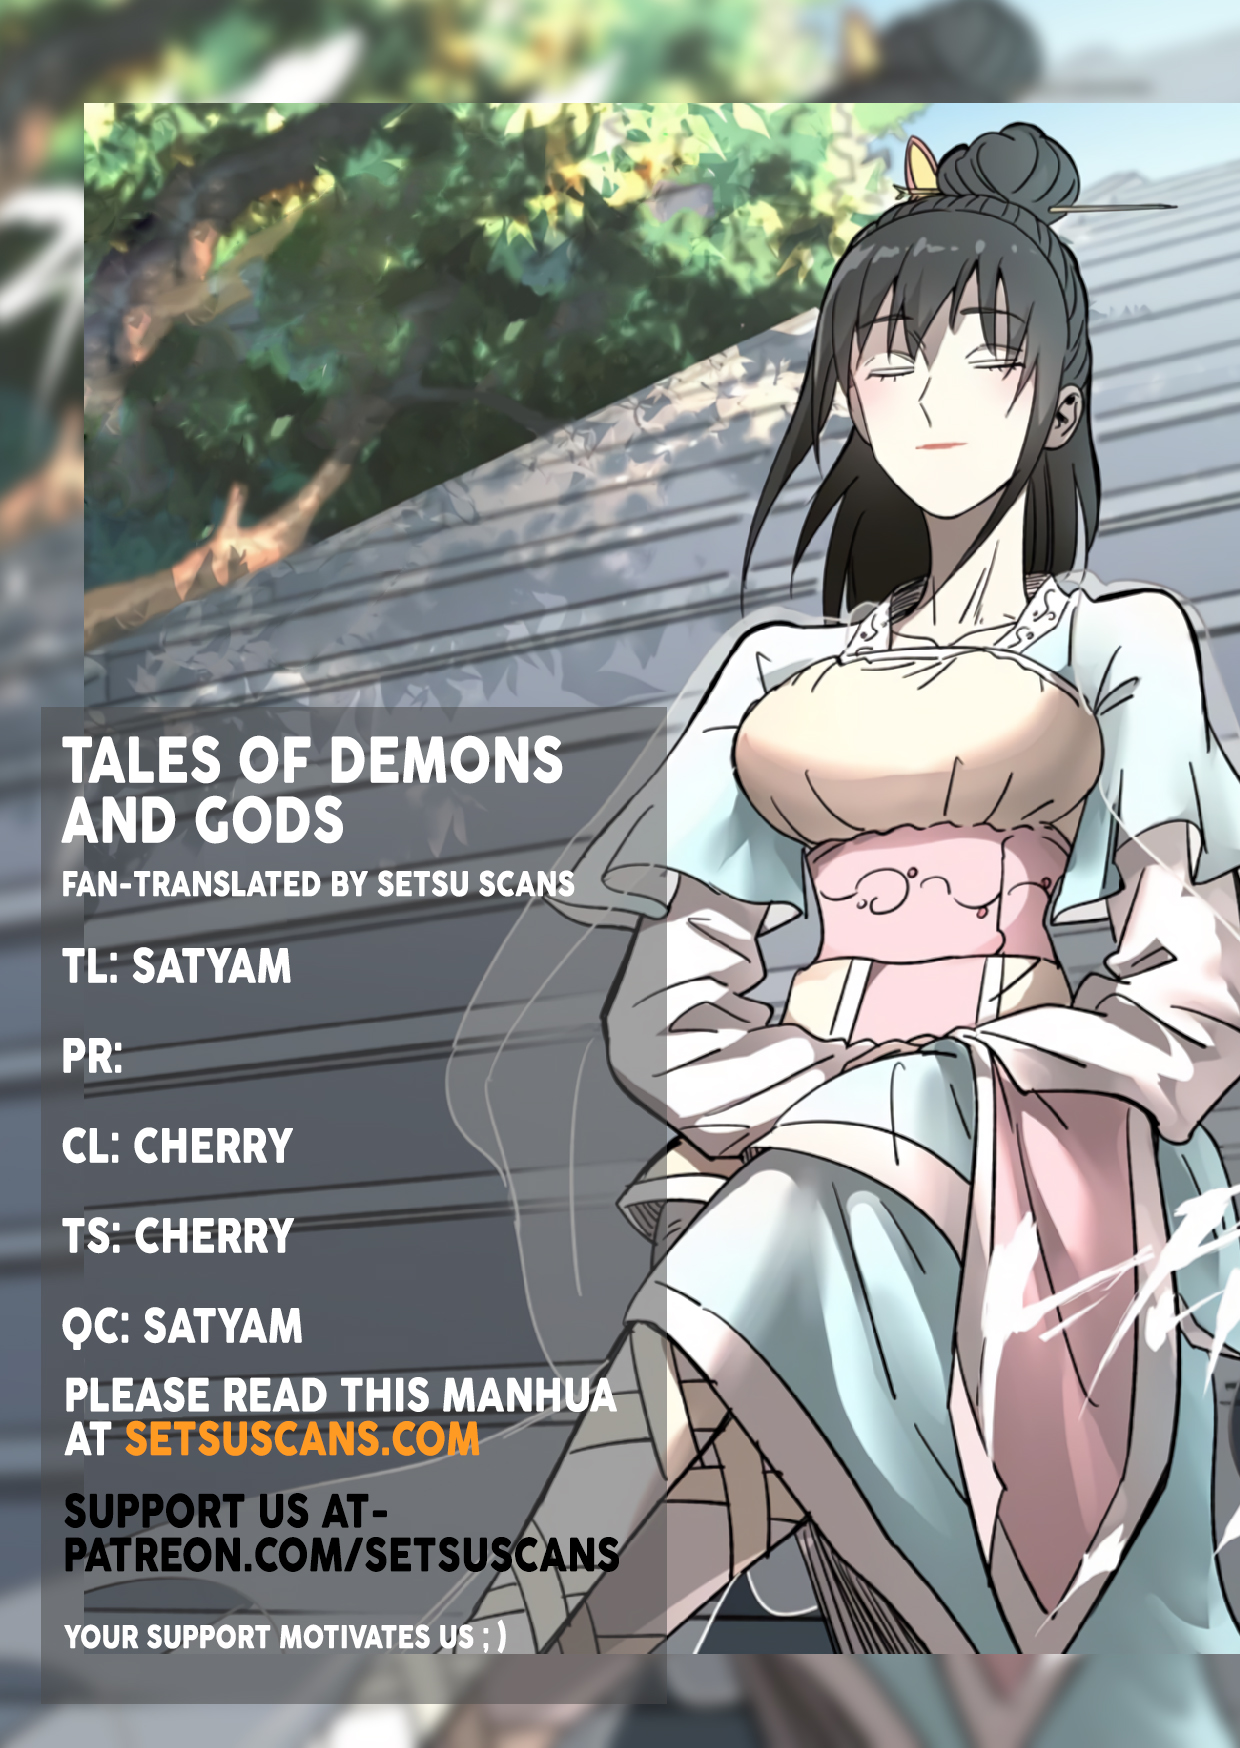 Tales of Demons and Gods - Chapter 14979 - Treatment (1) - Image 1